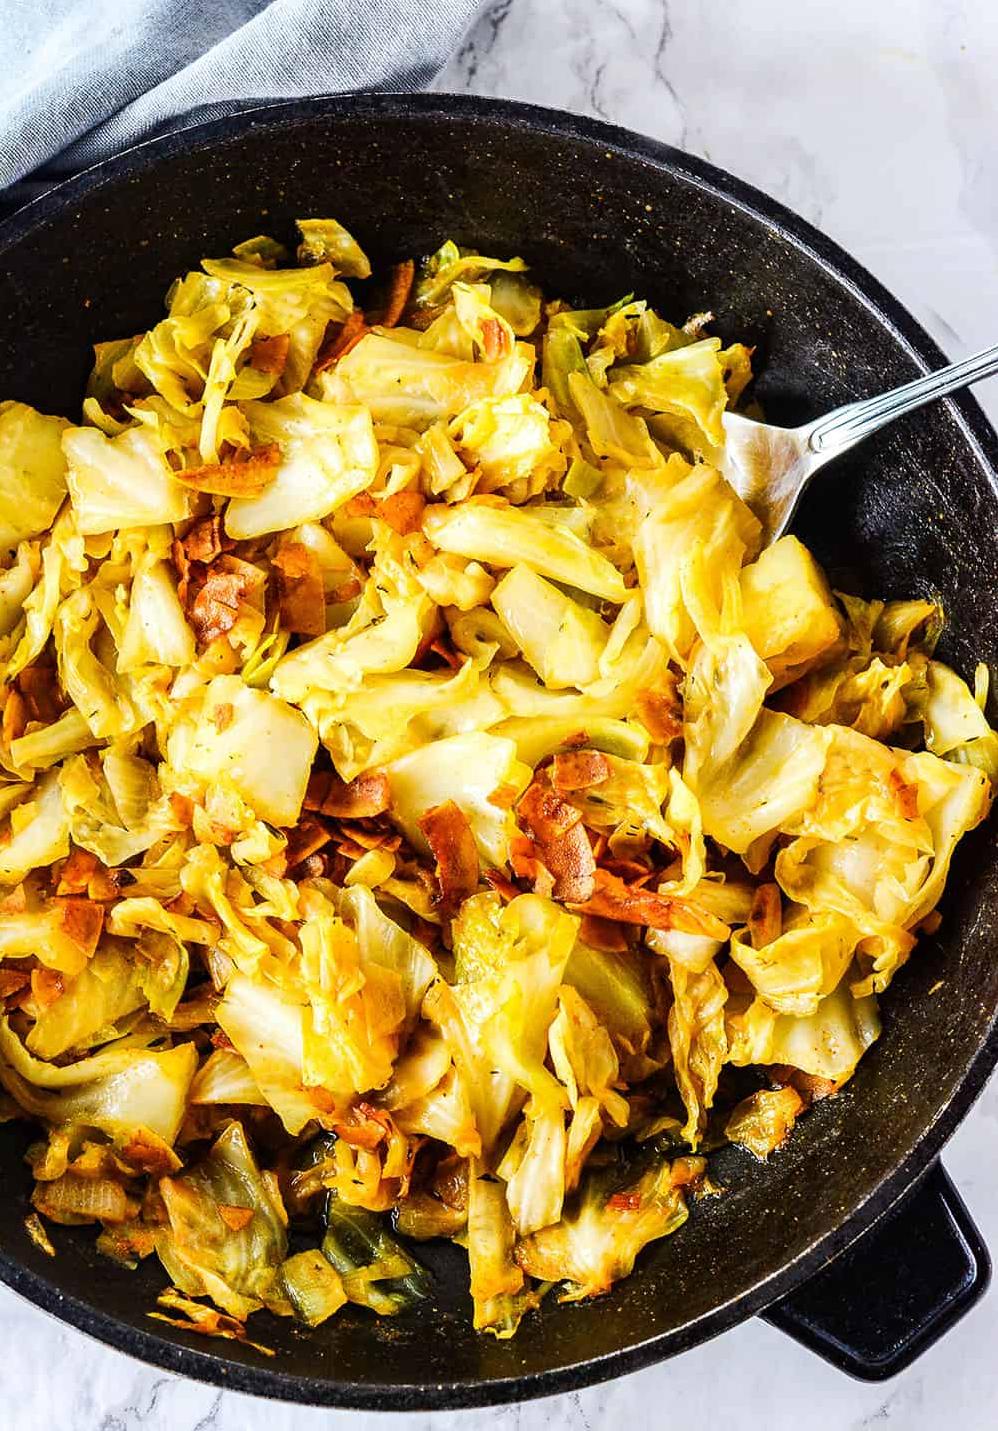  Spiced to perfection, this smothered cabbage is a vegan feast for the senses.